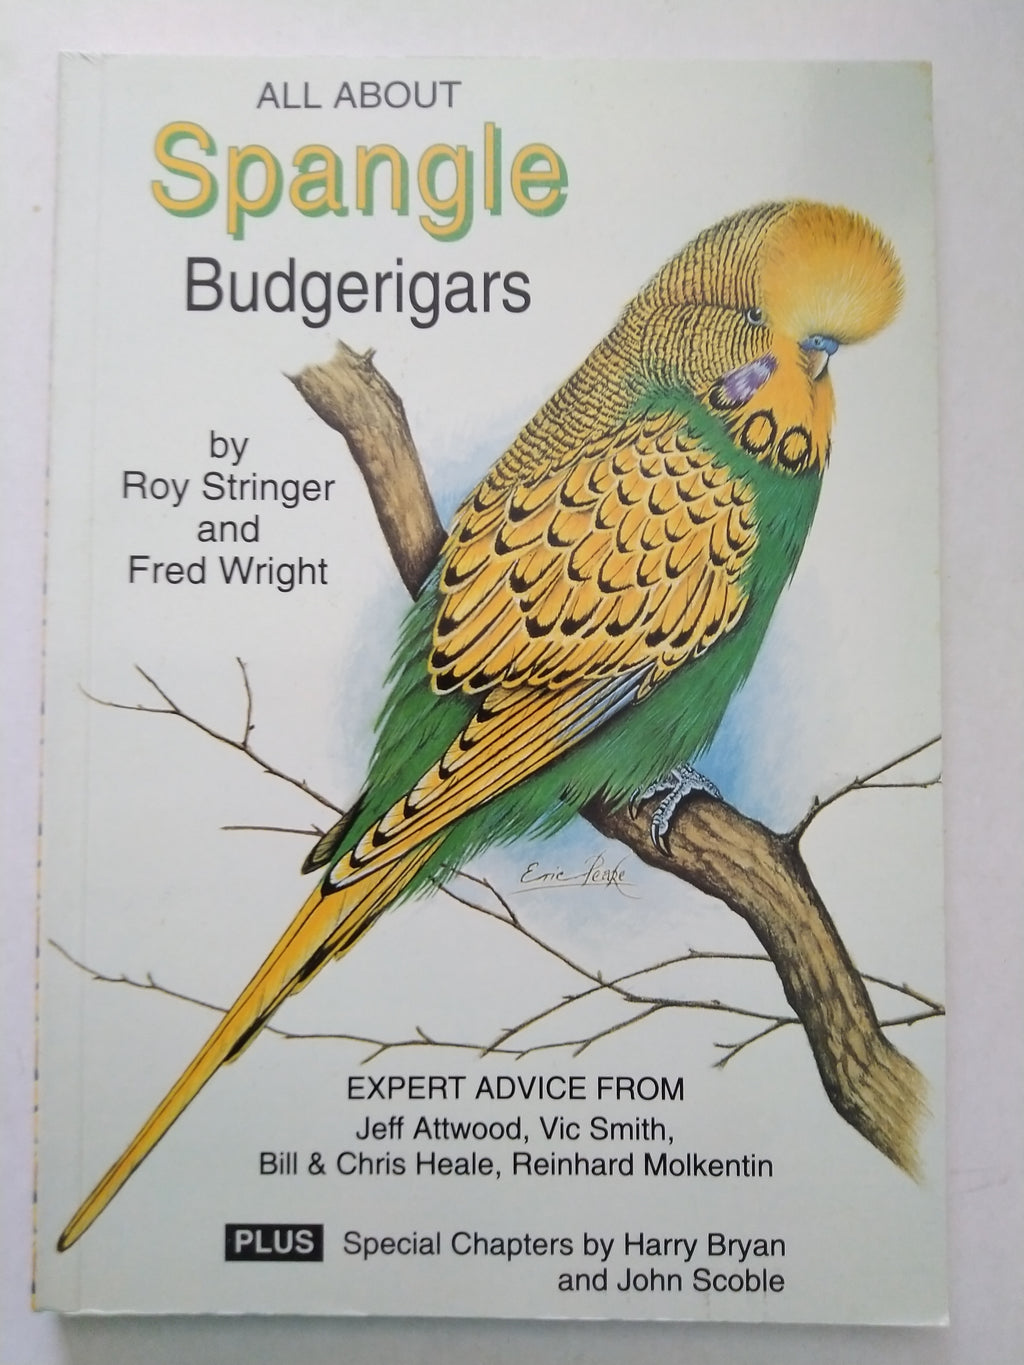 All About Spangle Budgerigars by Fred Wright and Roy Stringer (New)